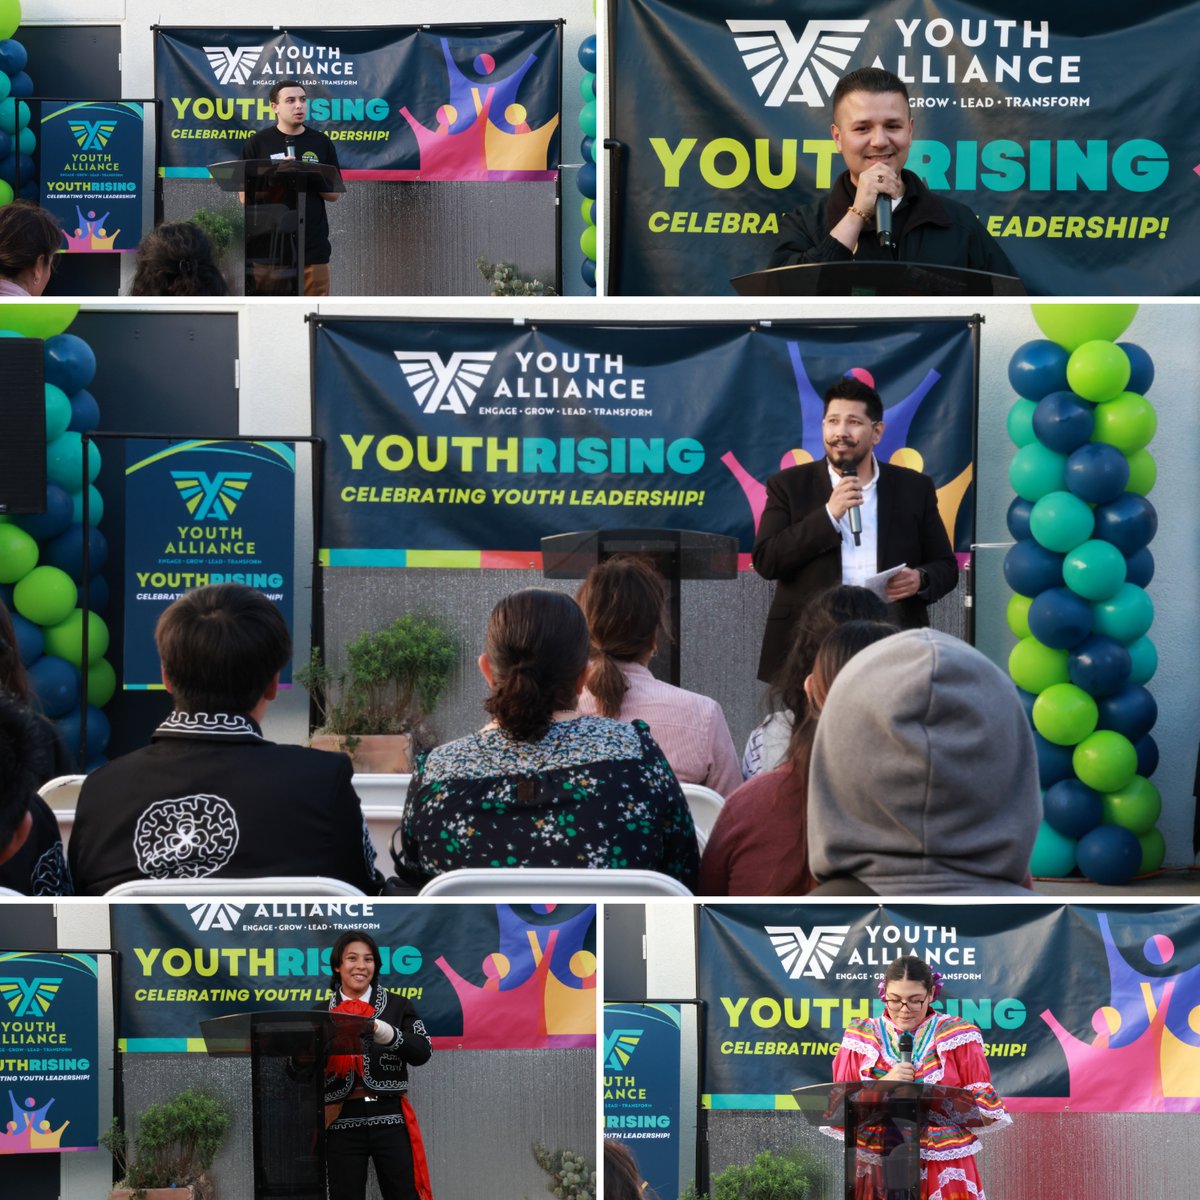 Thank you to everyone for Celebrating Youth Leadership with us during Youth Rising 2024 ✨️

Youth Alliance is so proud of all our youth as they continue to grow into their leadership development and discover their voices! ✊🏽✊🏾

#YouthRisingScholarships #YouthLeaders #Recap